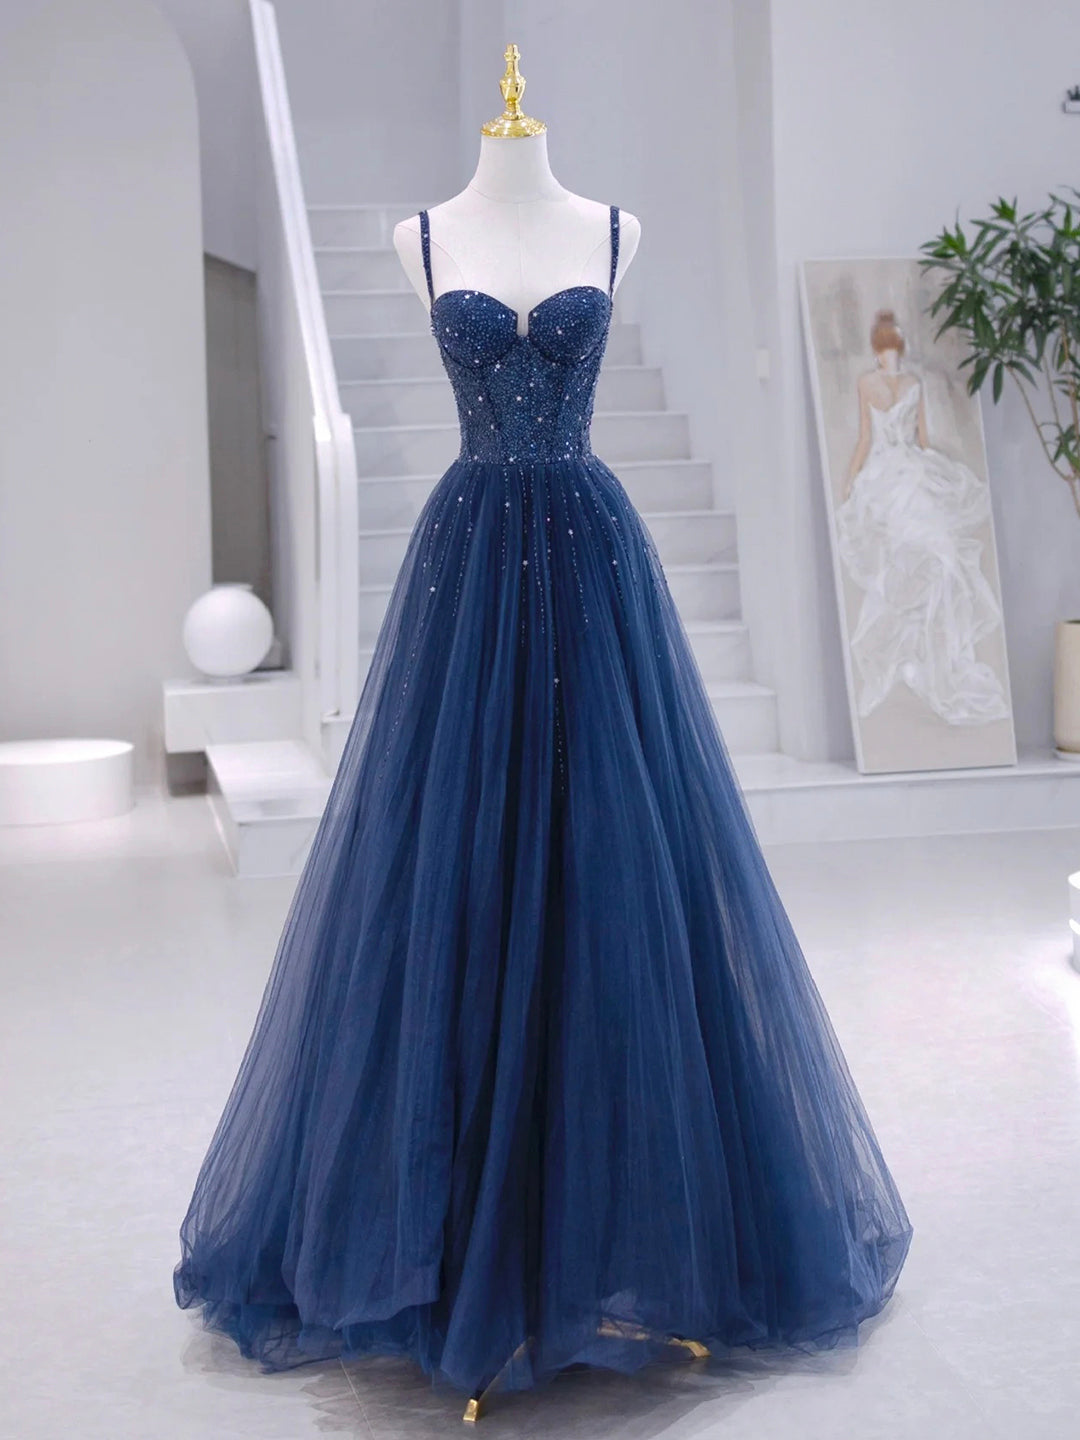 Blue Tulle Beaded Long Corset Formal Dress, Blue Evening Dress outfit, Party Dress Online Shopping